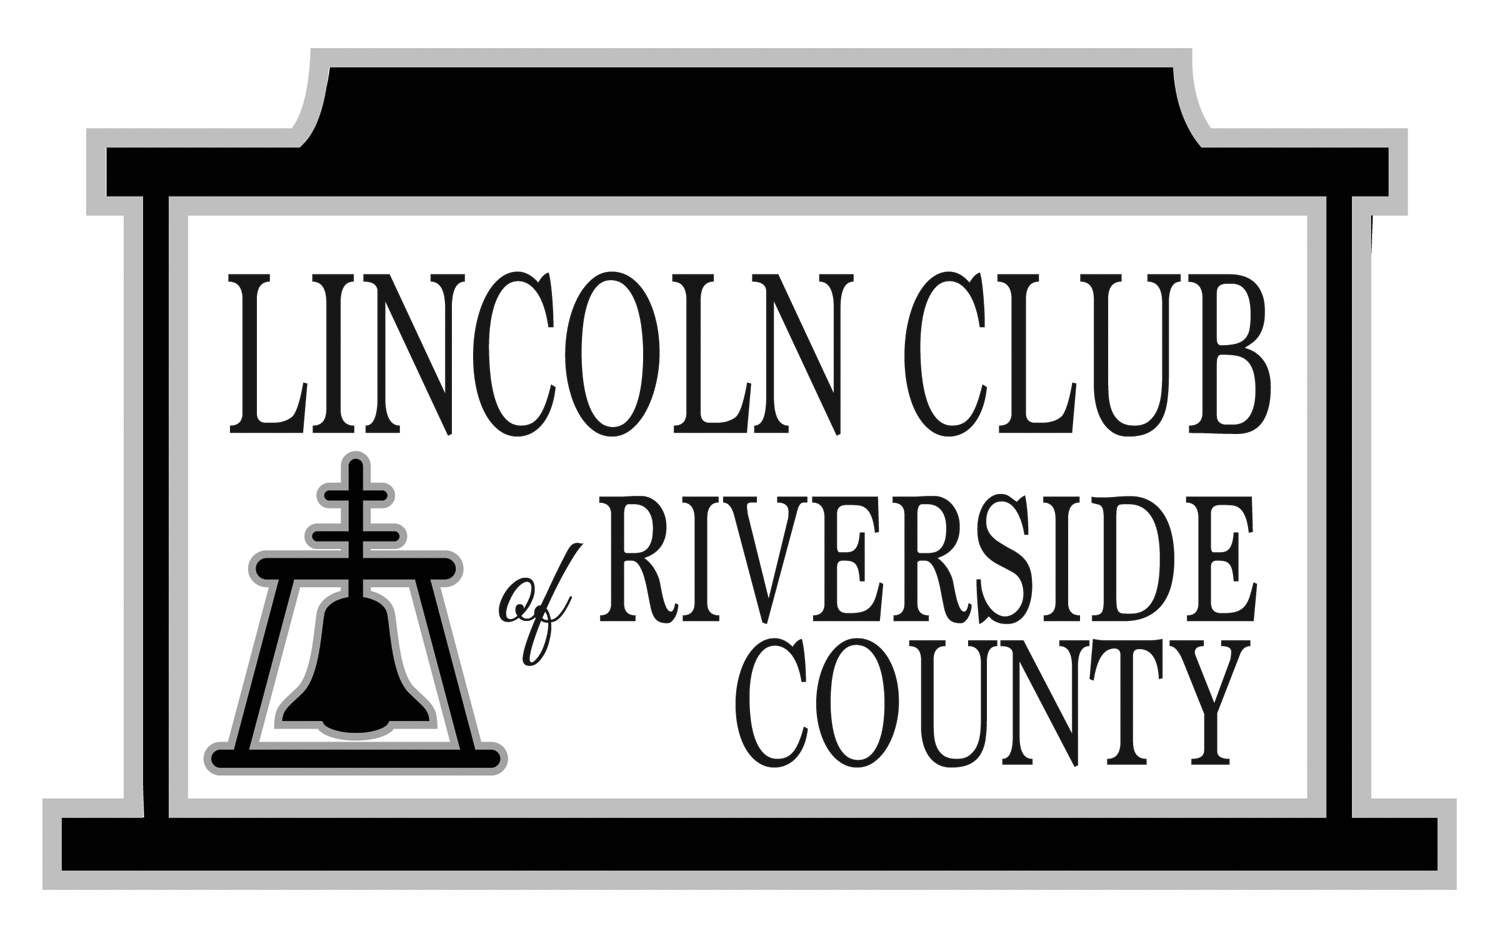 Lincoln Club of Riverside County